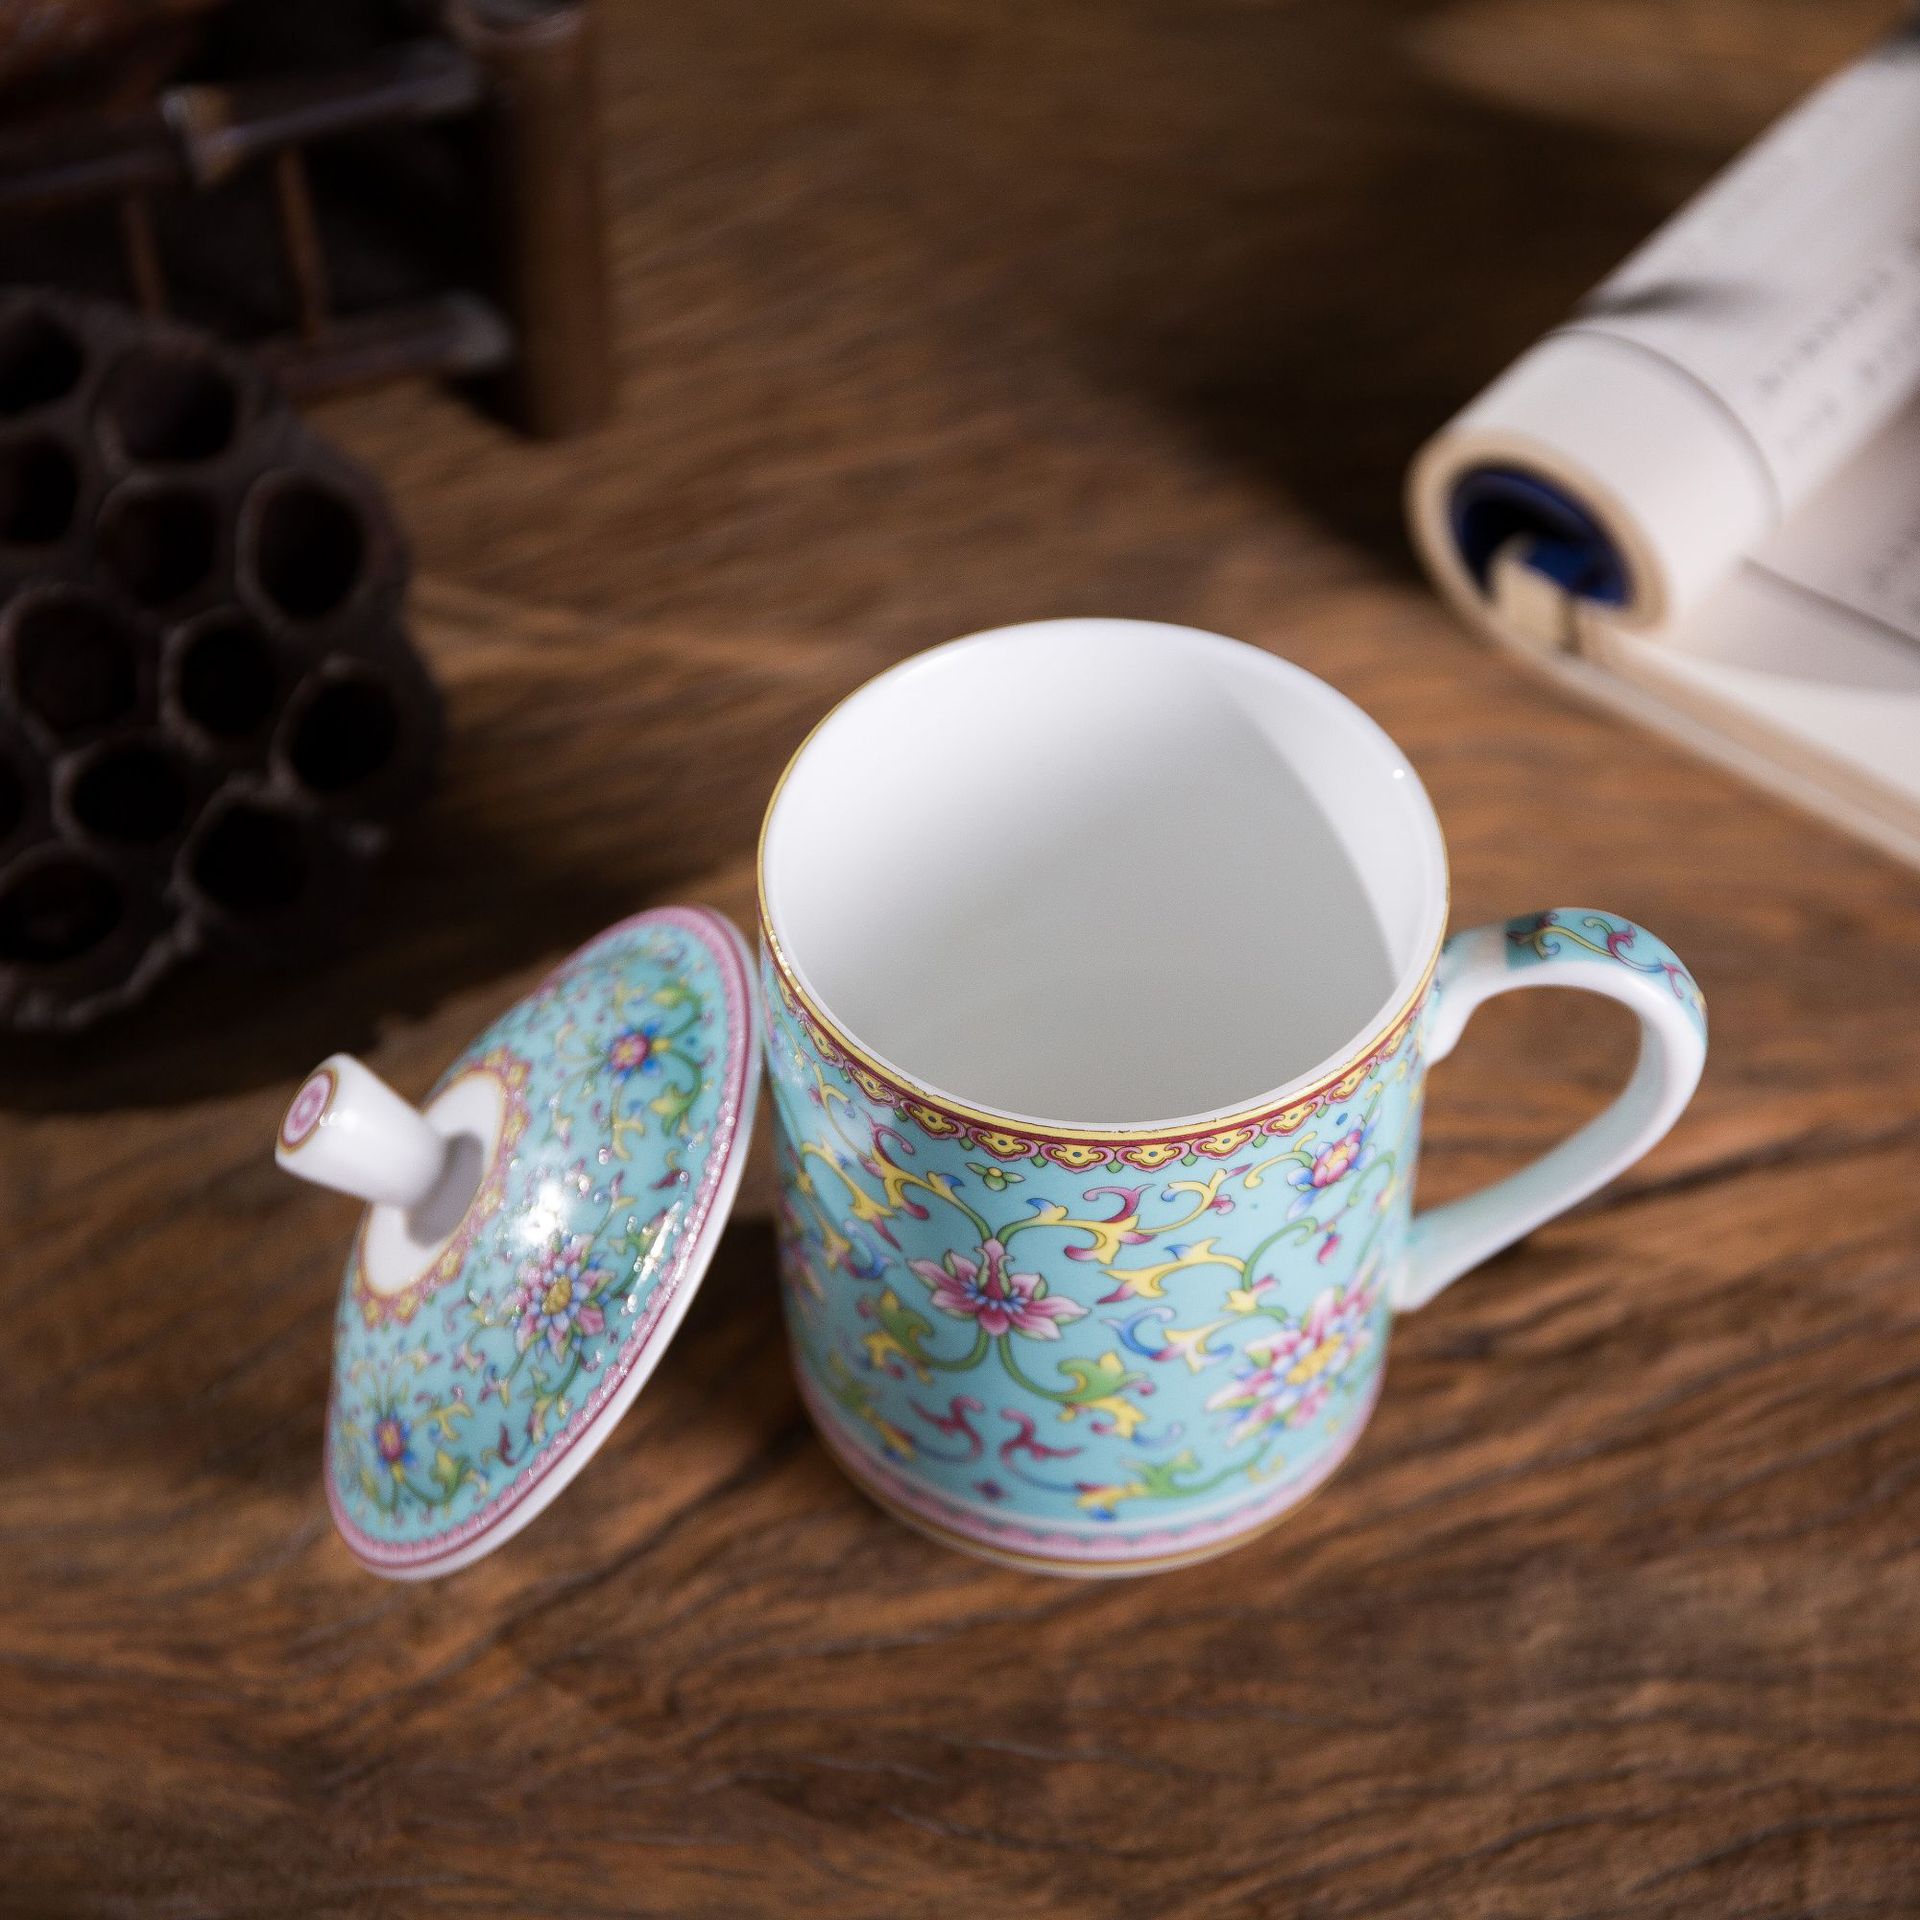 Jingdezhen Ceramic Enamel Bone China Tea Cup with Lid Pastel Office Cup Palace Style Tea Cup Meeting Gift Cup